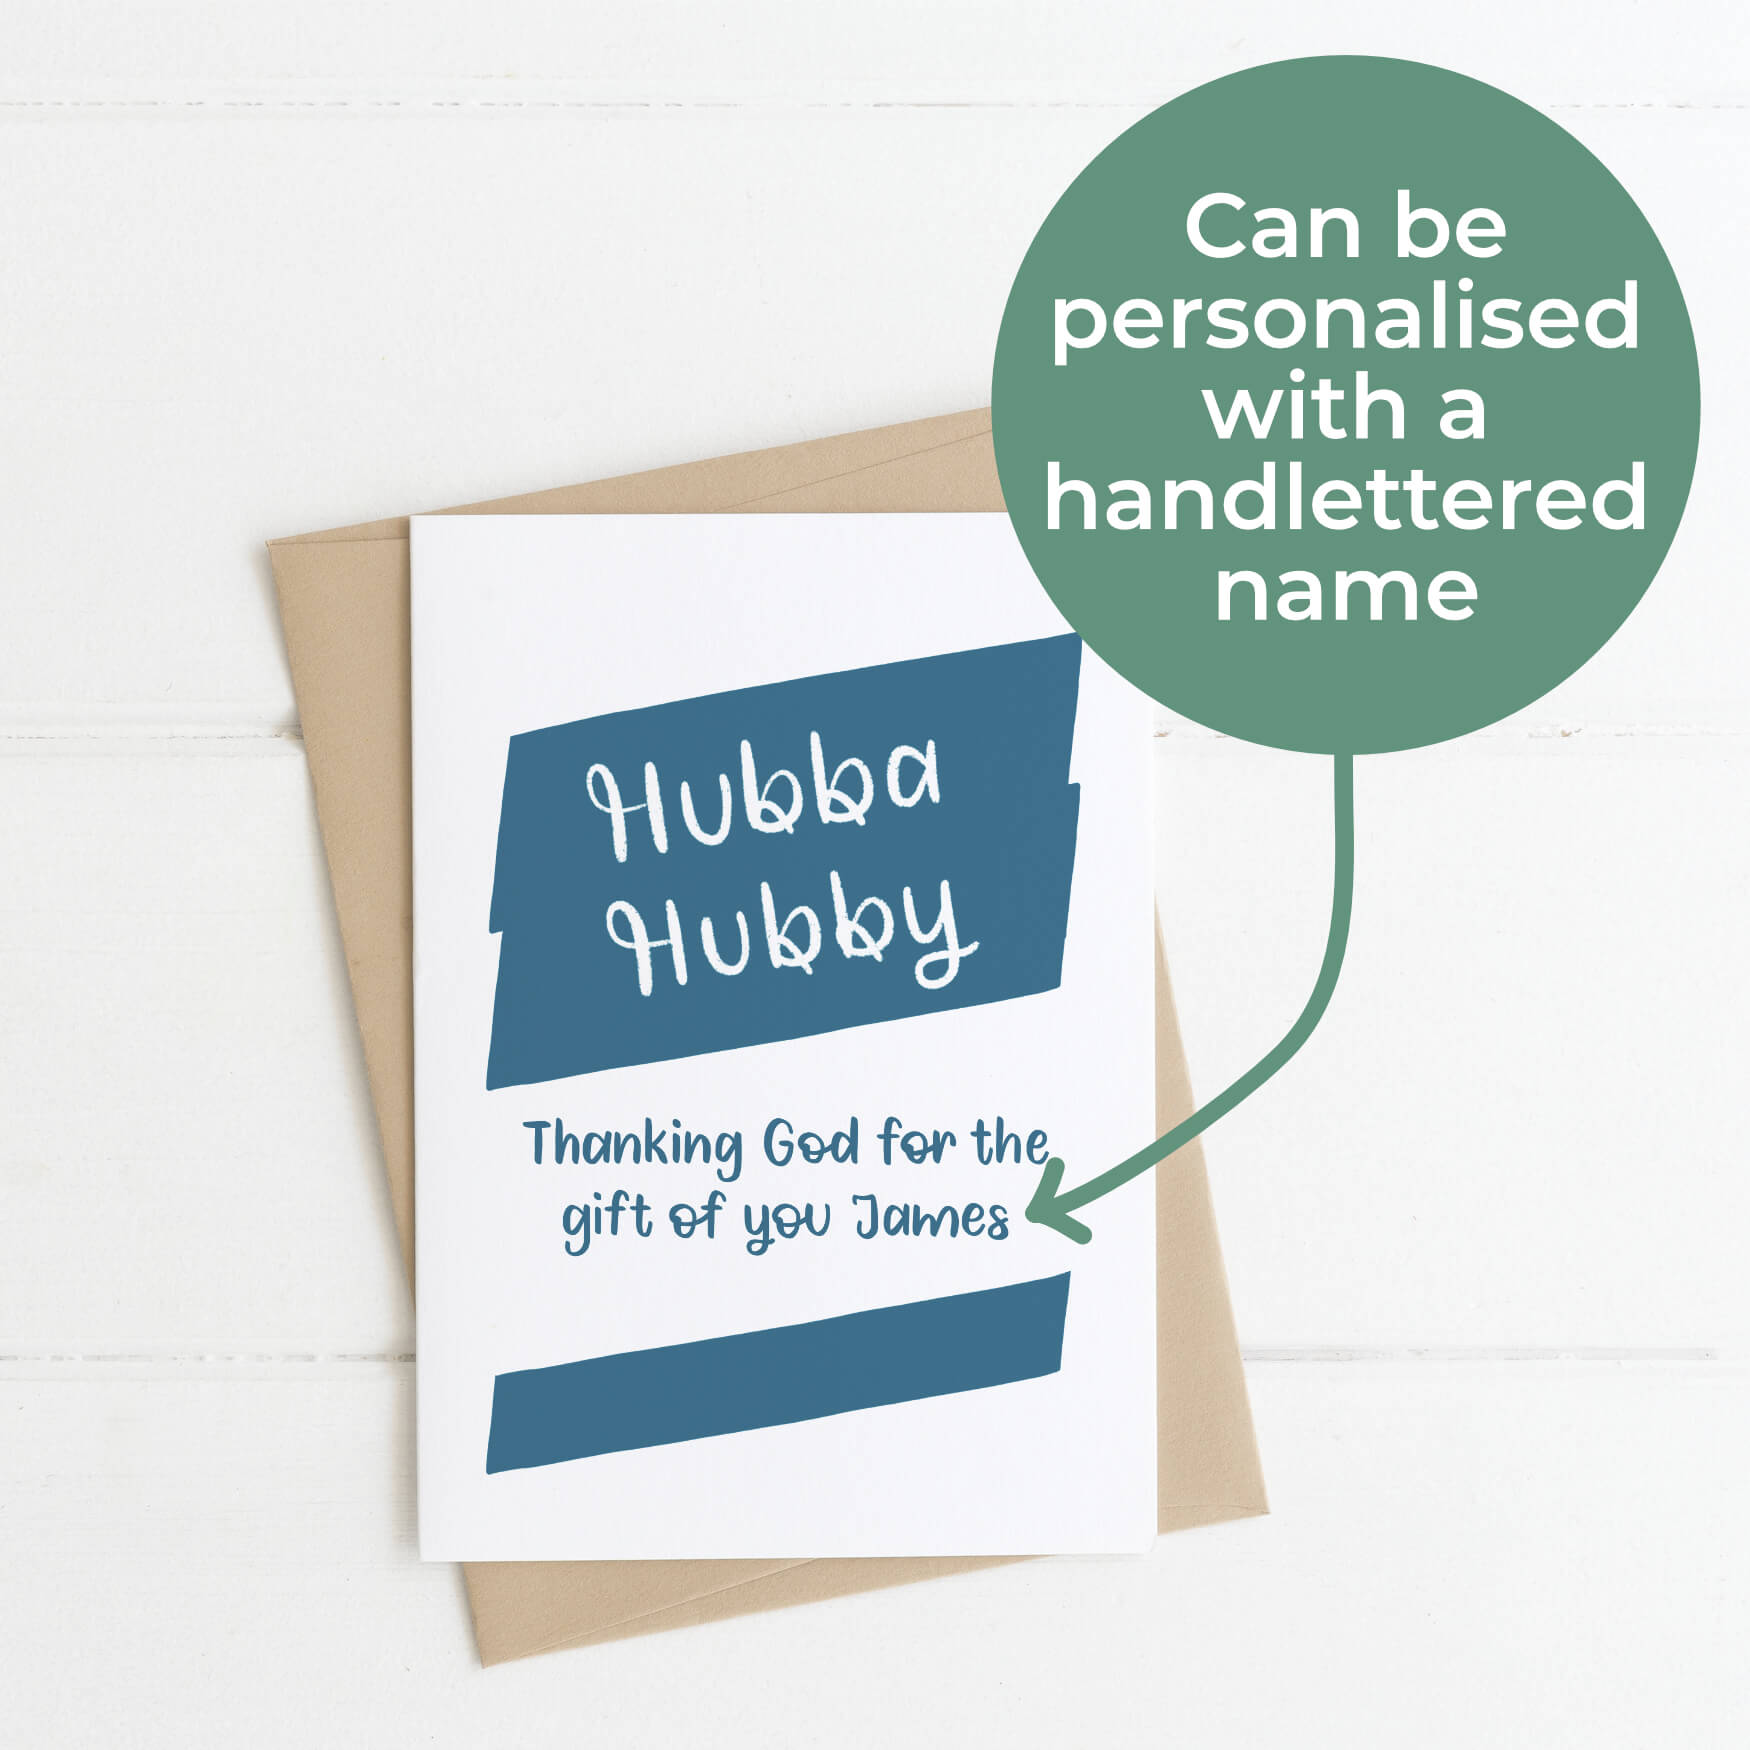 Hubba Hubby Thanking God For You Personalisable Christian Card with custom name